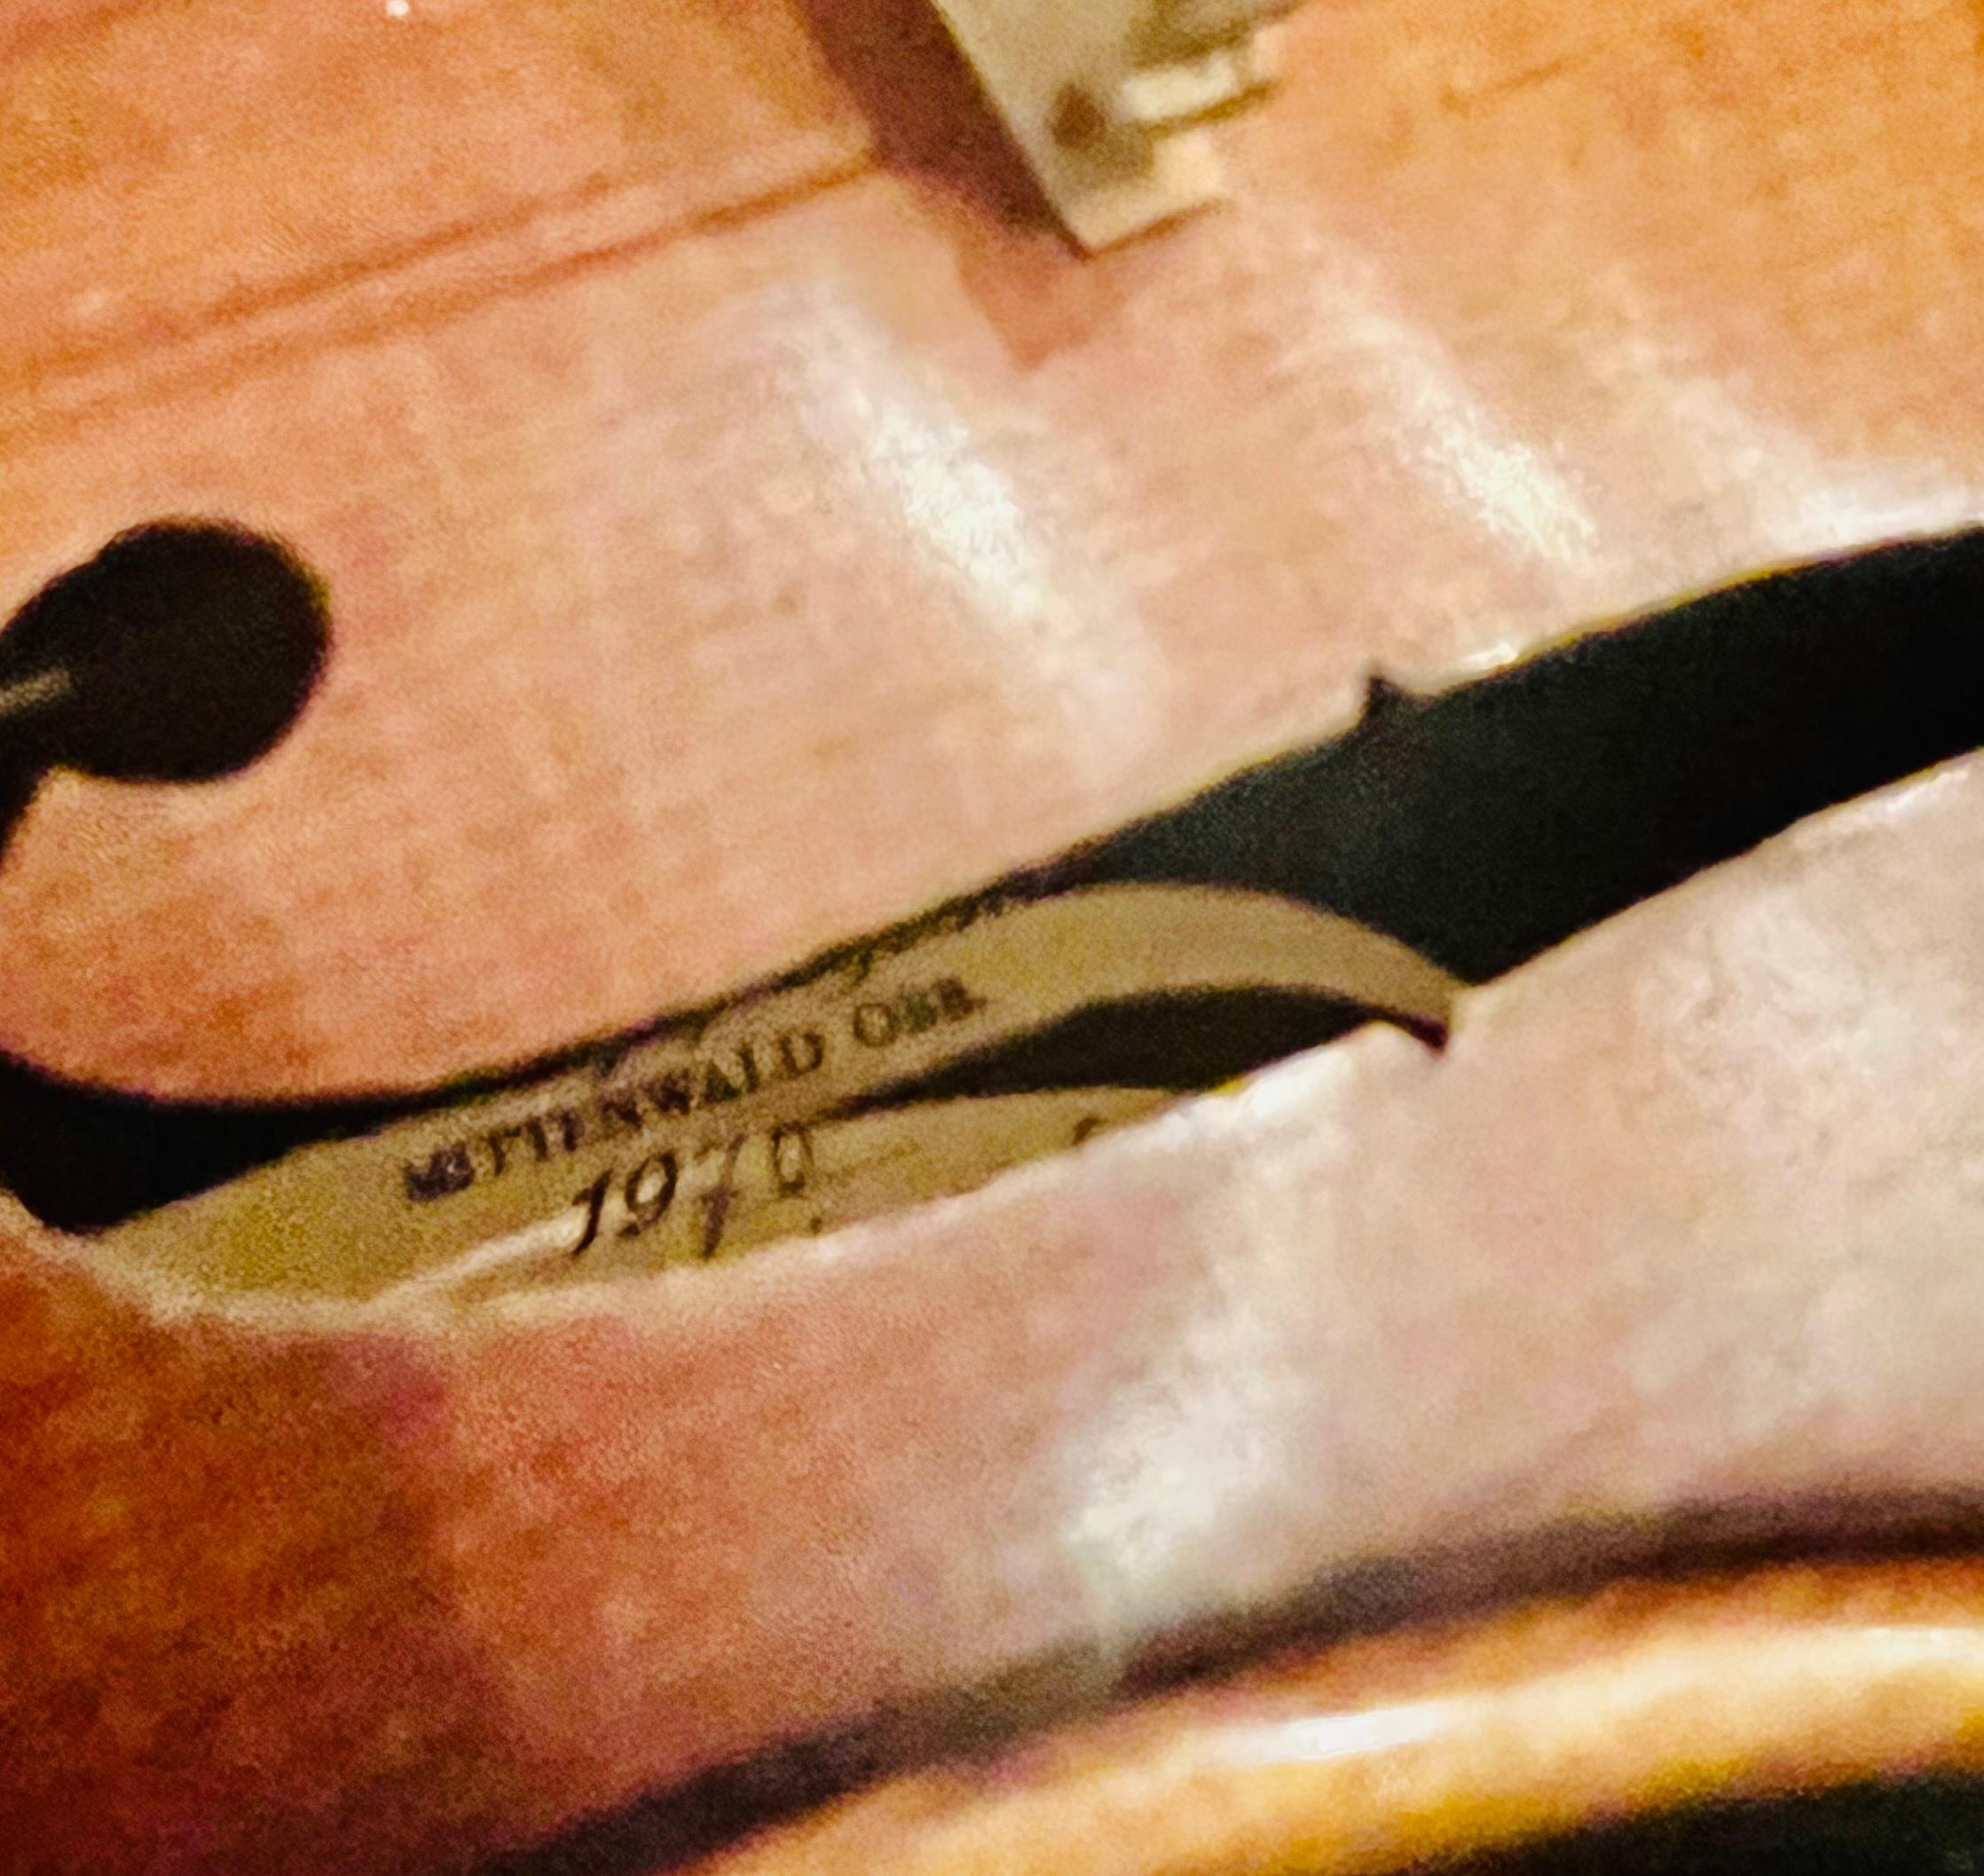 1970 3/4 E.R. Pfretzschner Hand-Crafted Violin in the Style of A. Stradivarius im Angebot 11